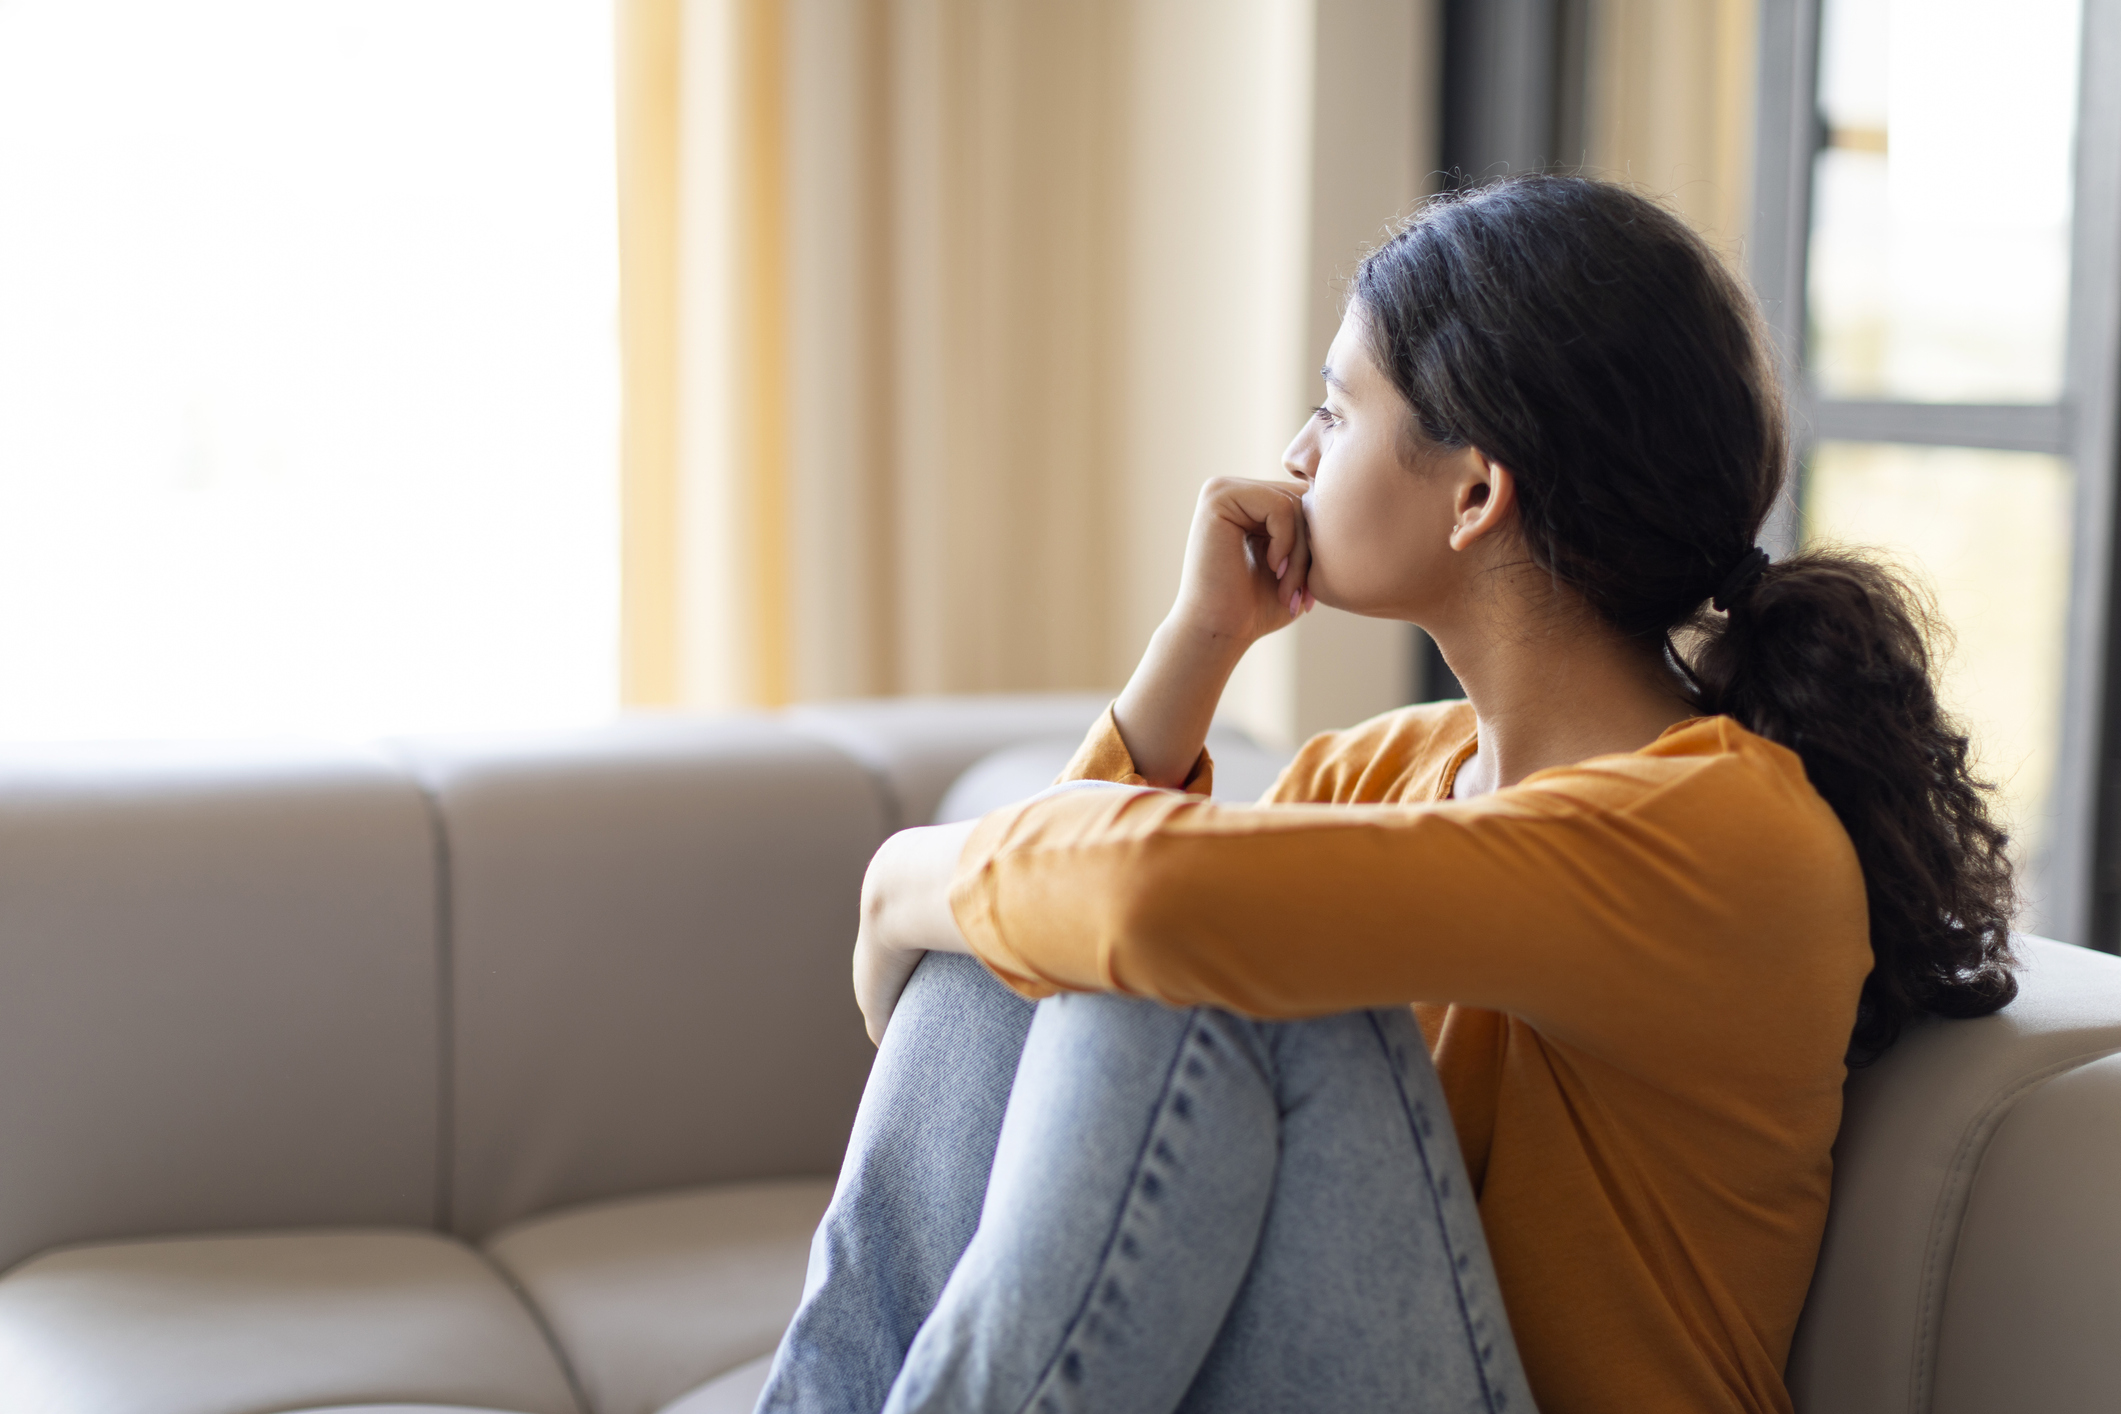 Portrait Of Pensive Depressed Young Indian Woman Sitting On Couch At Home, Upset Eastern Female Leaning Head On Hand And Looking Away, Suffering Mental Breakdown Or Seasonal Depression, Copy Space